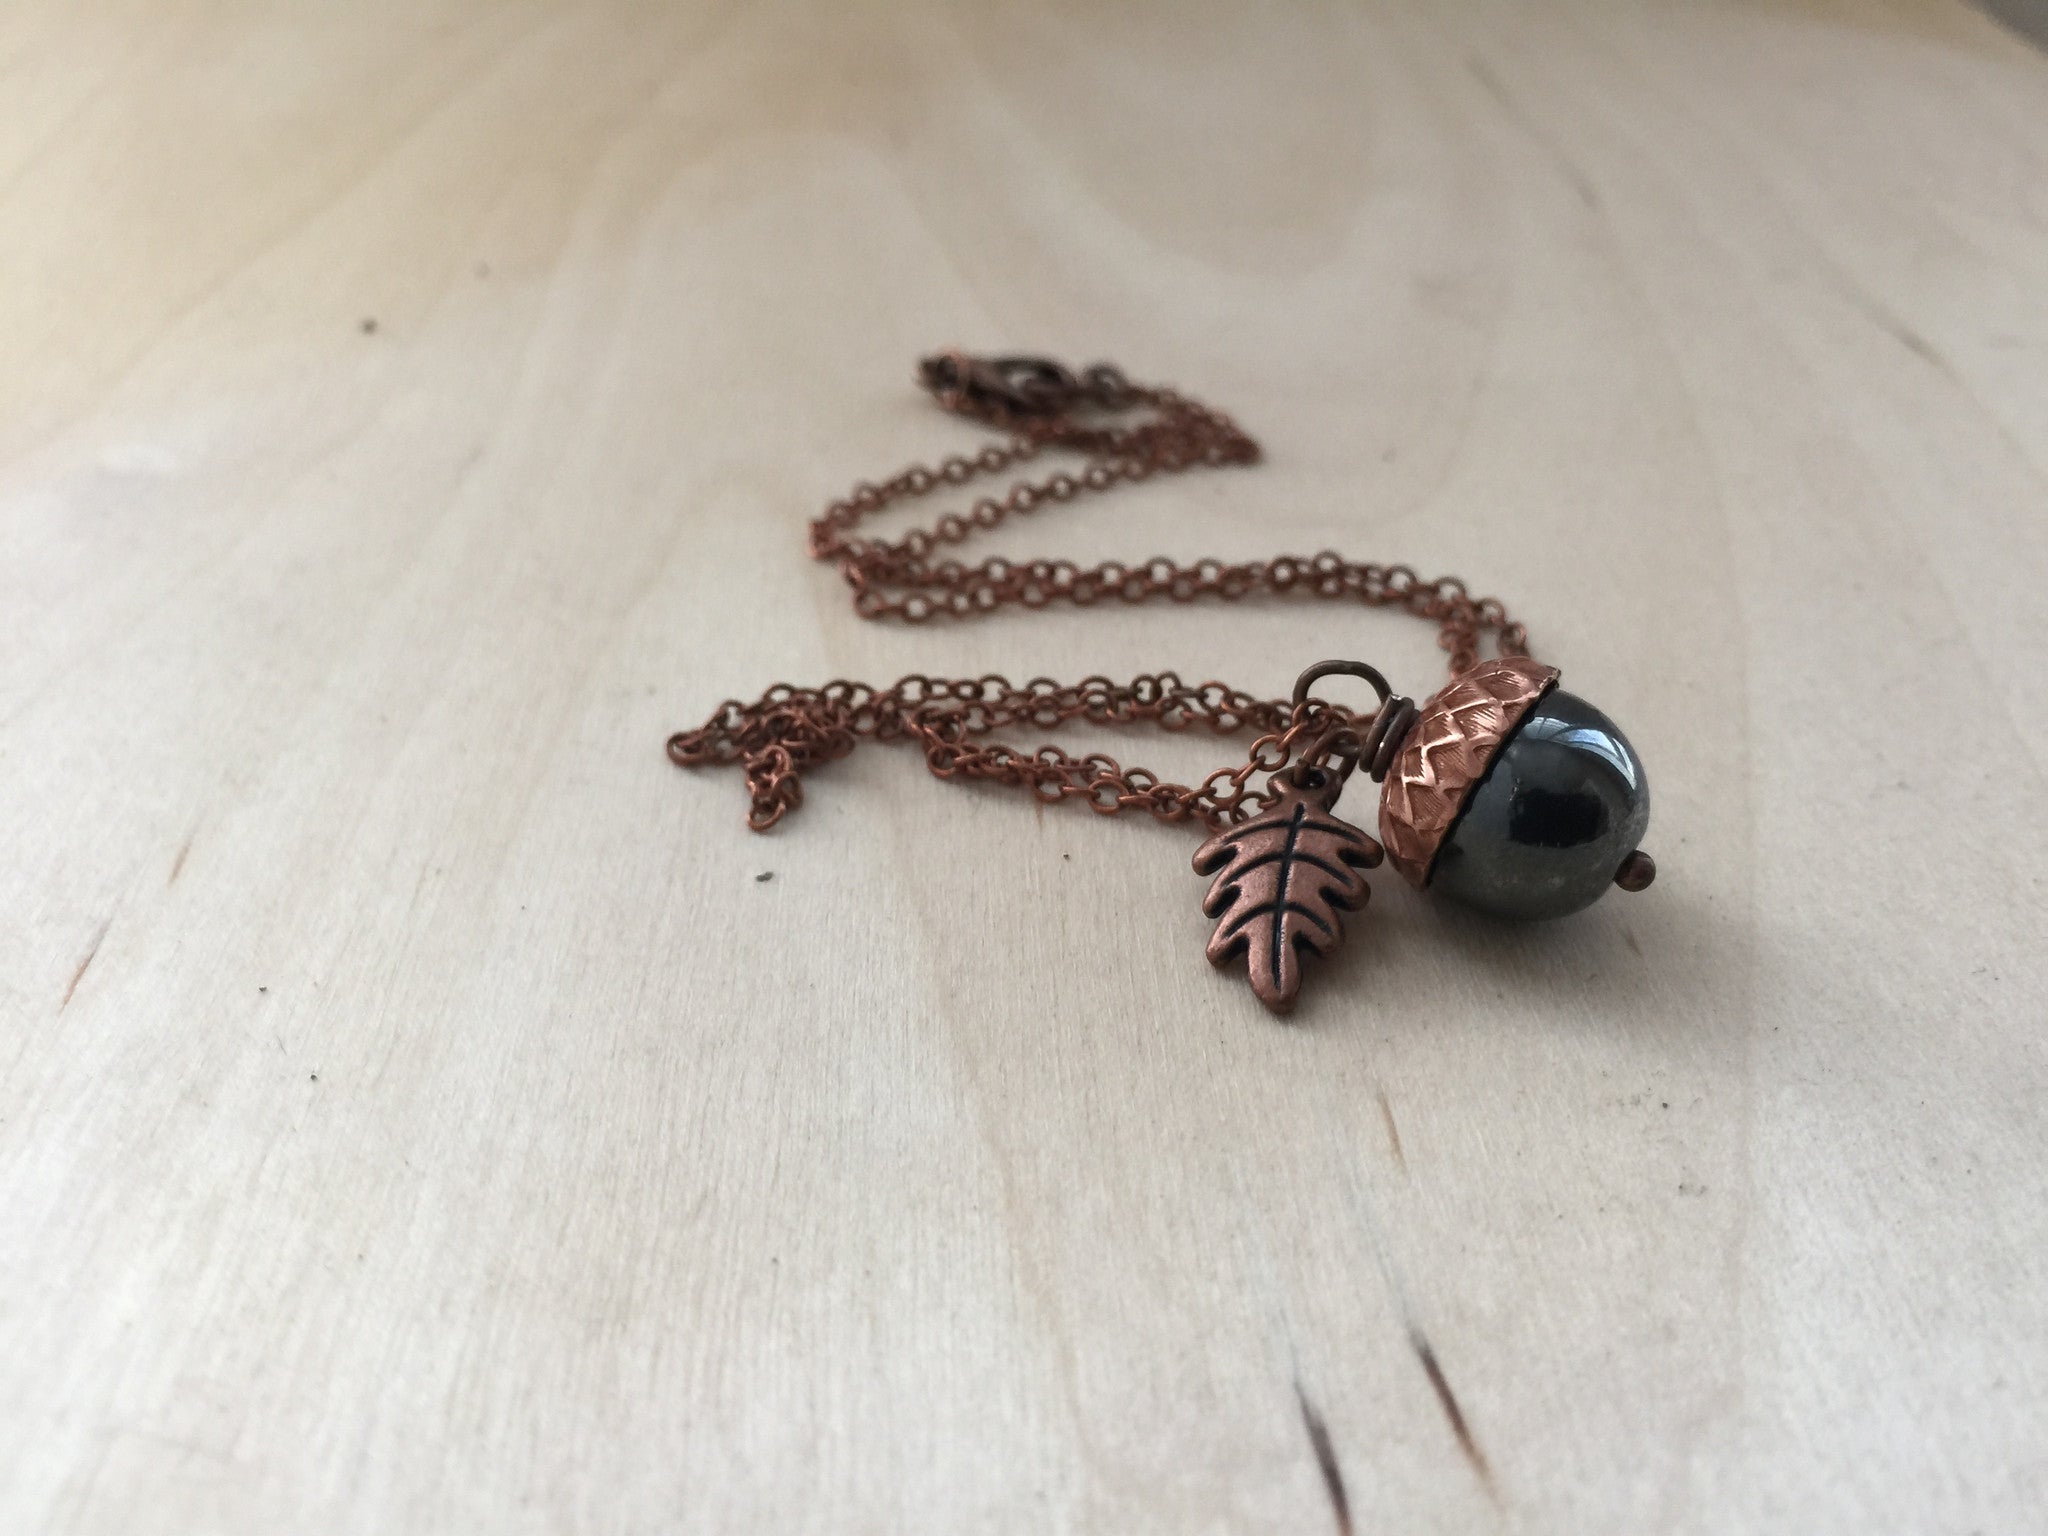 Hematite & Copper Acorn Necklace | Cute Nature Acorn Charm Necklace | Woodland Nature Jewelry Acorn - Enchanted Leaves - Nature Jewelry - Unique Handmade Gifts